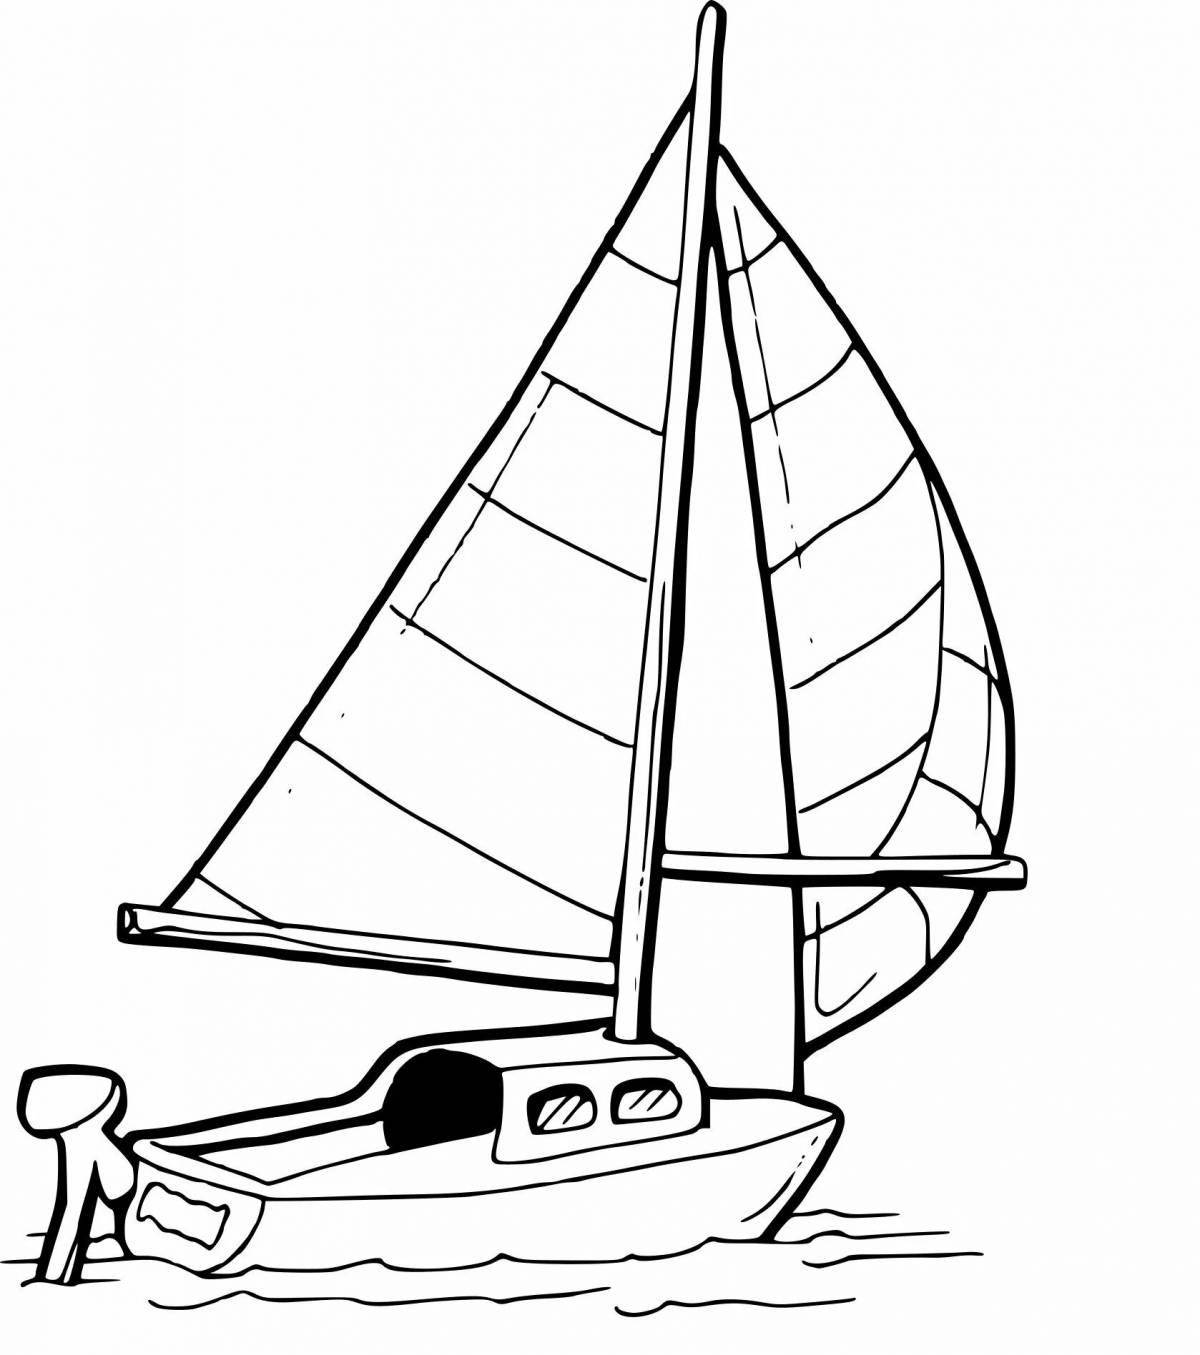 Stimulating yacht coloring book for kids